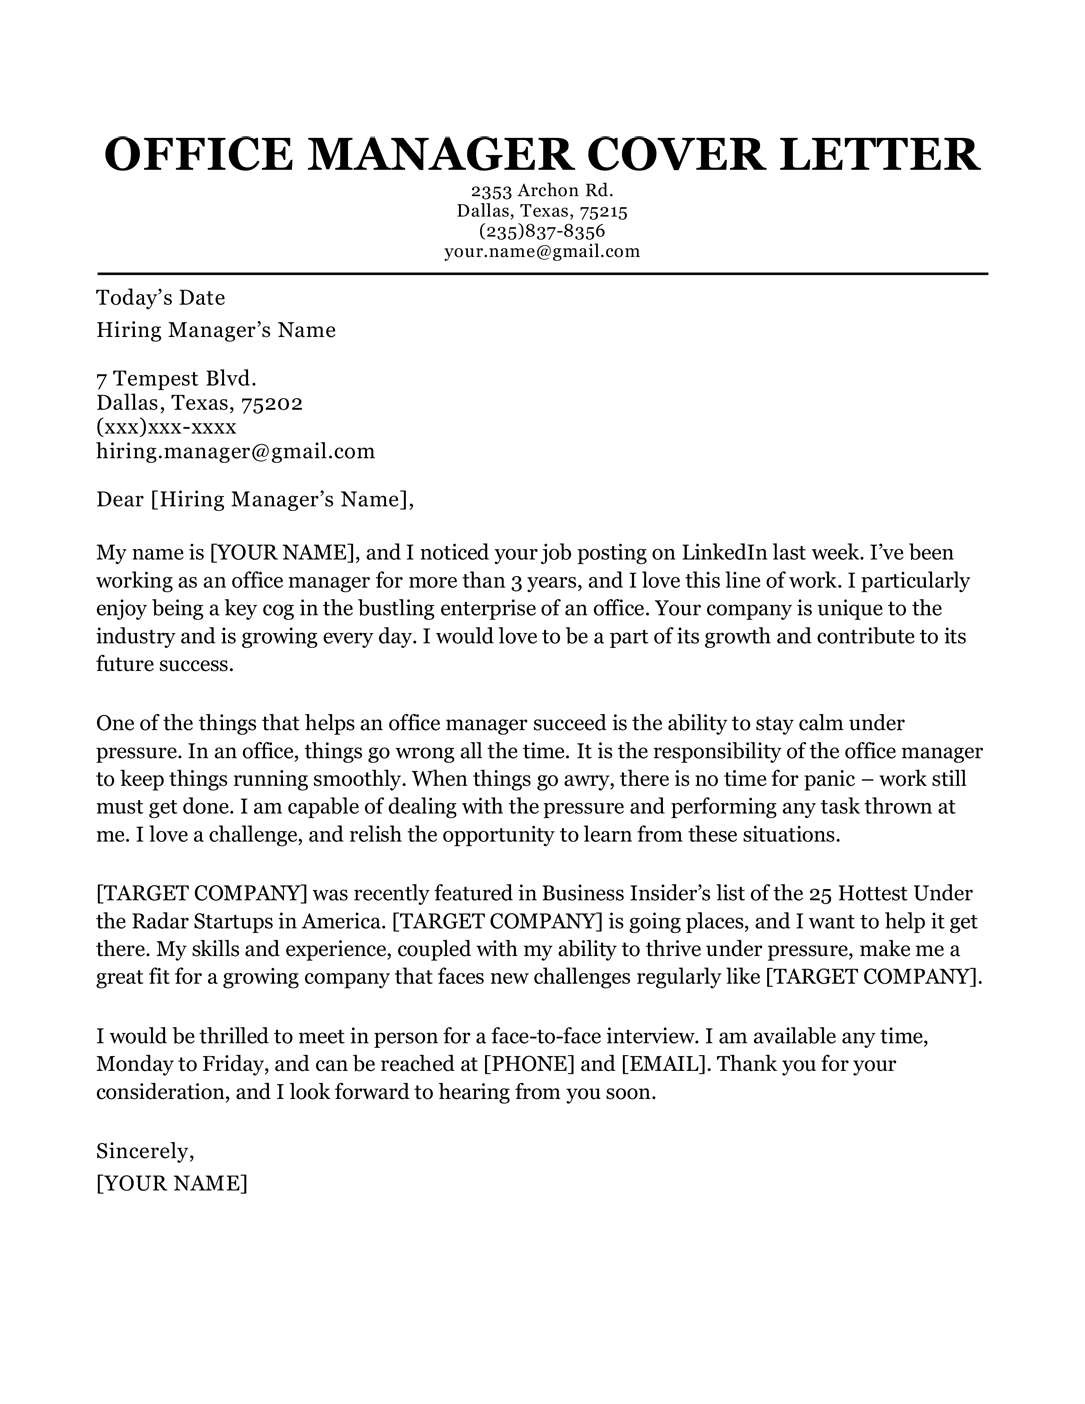 Office Manager Cover Letter Sample Resume Companion